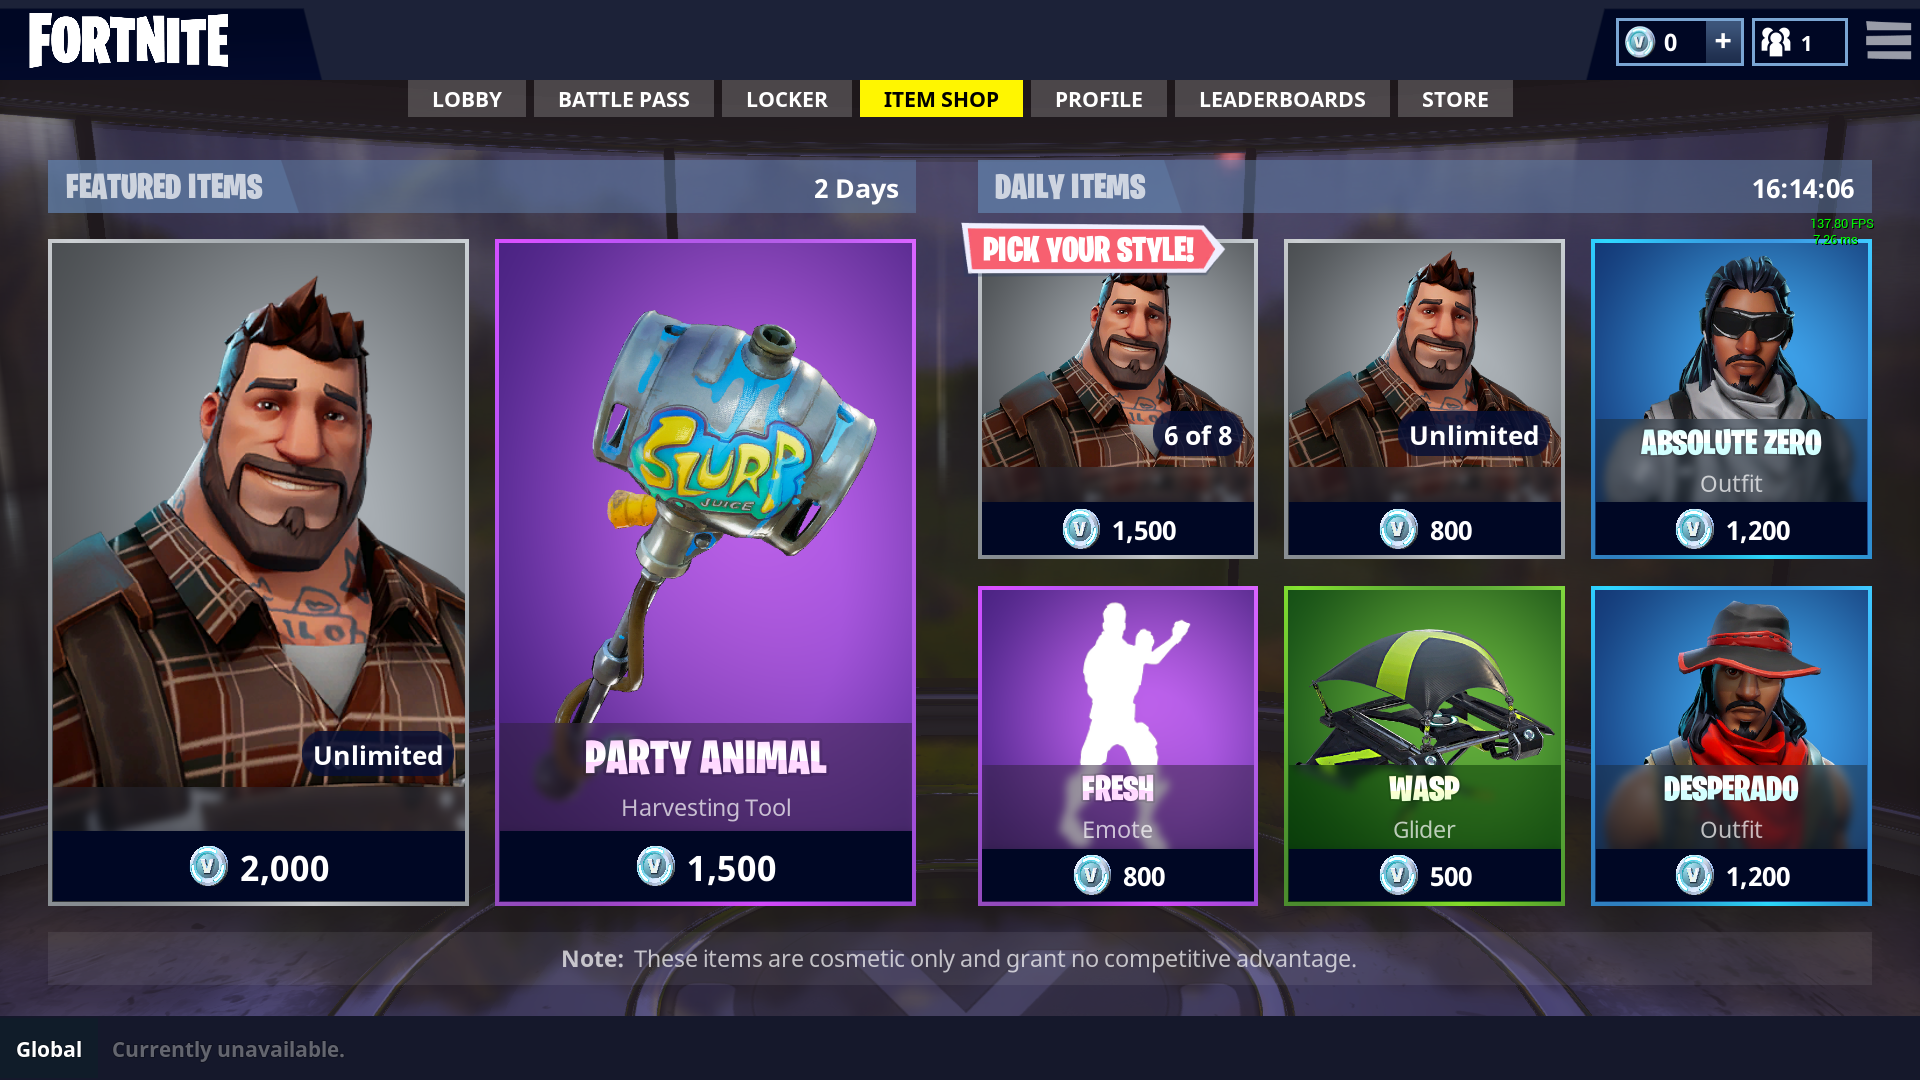 Free download So I went to fortnite and decided to visit the items